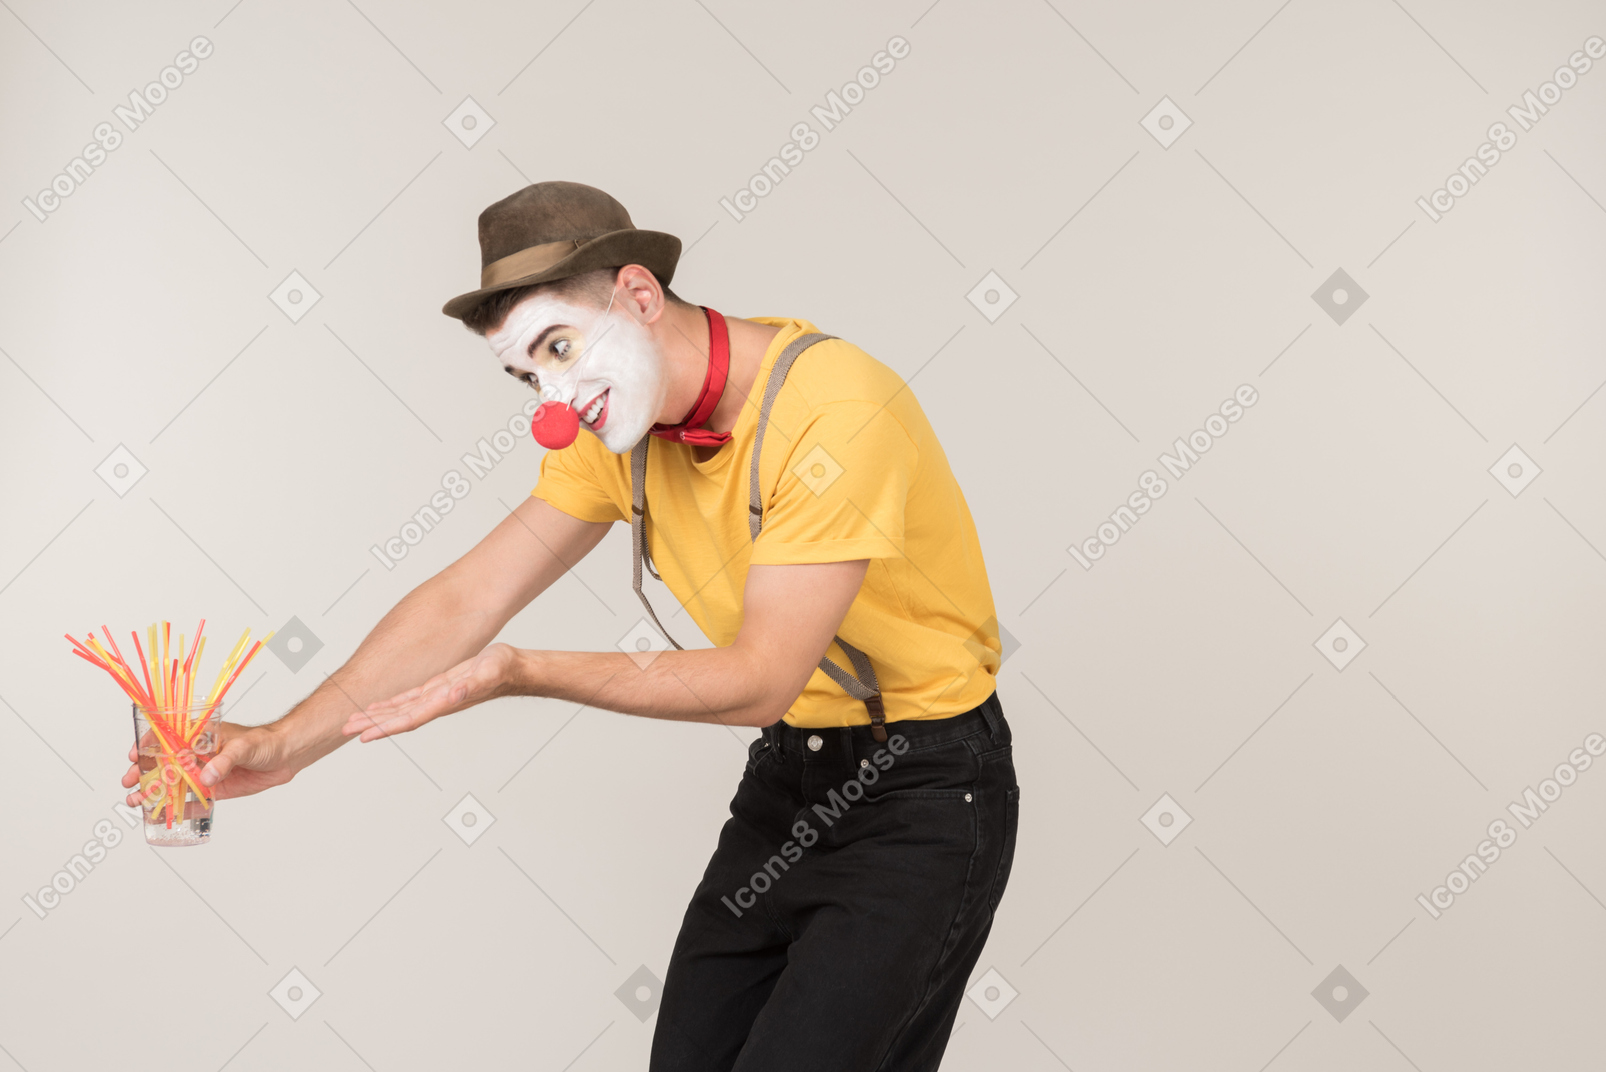 Sad male clown pointing at glass of plastic straws he's holding